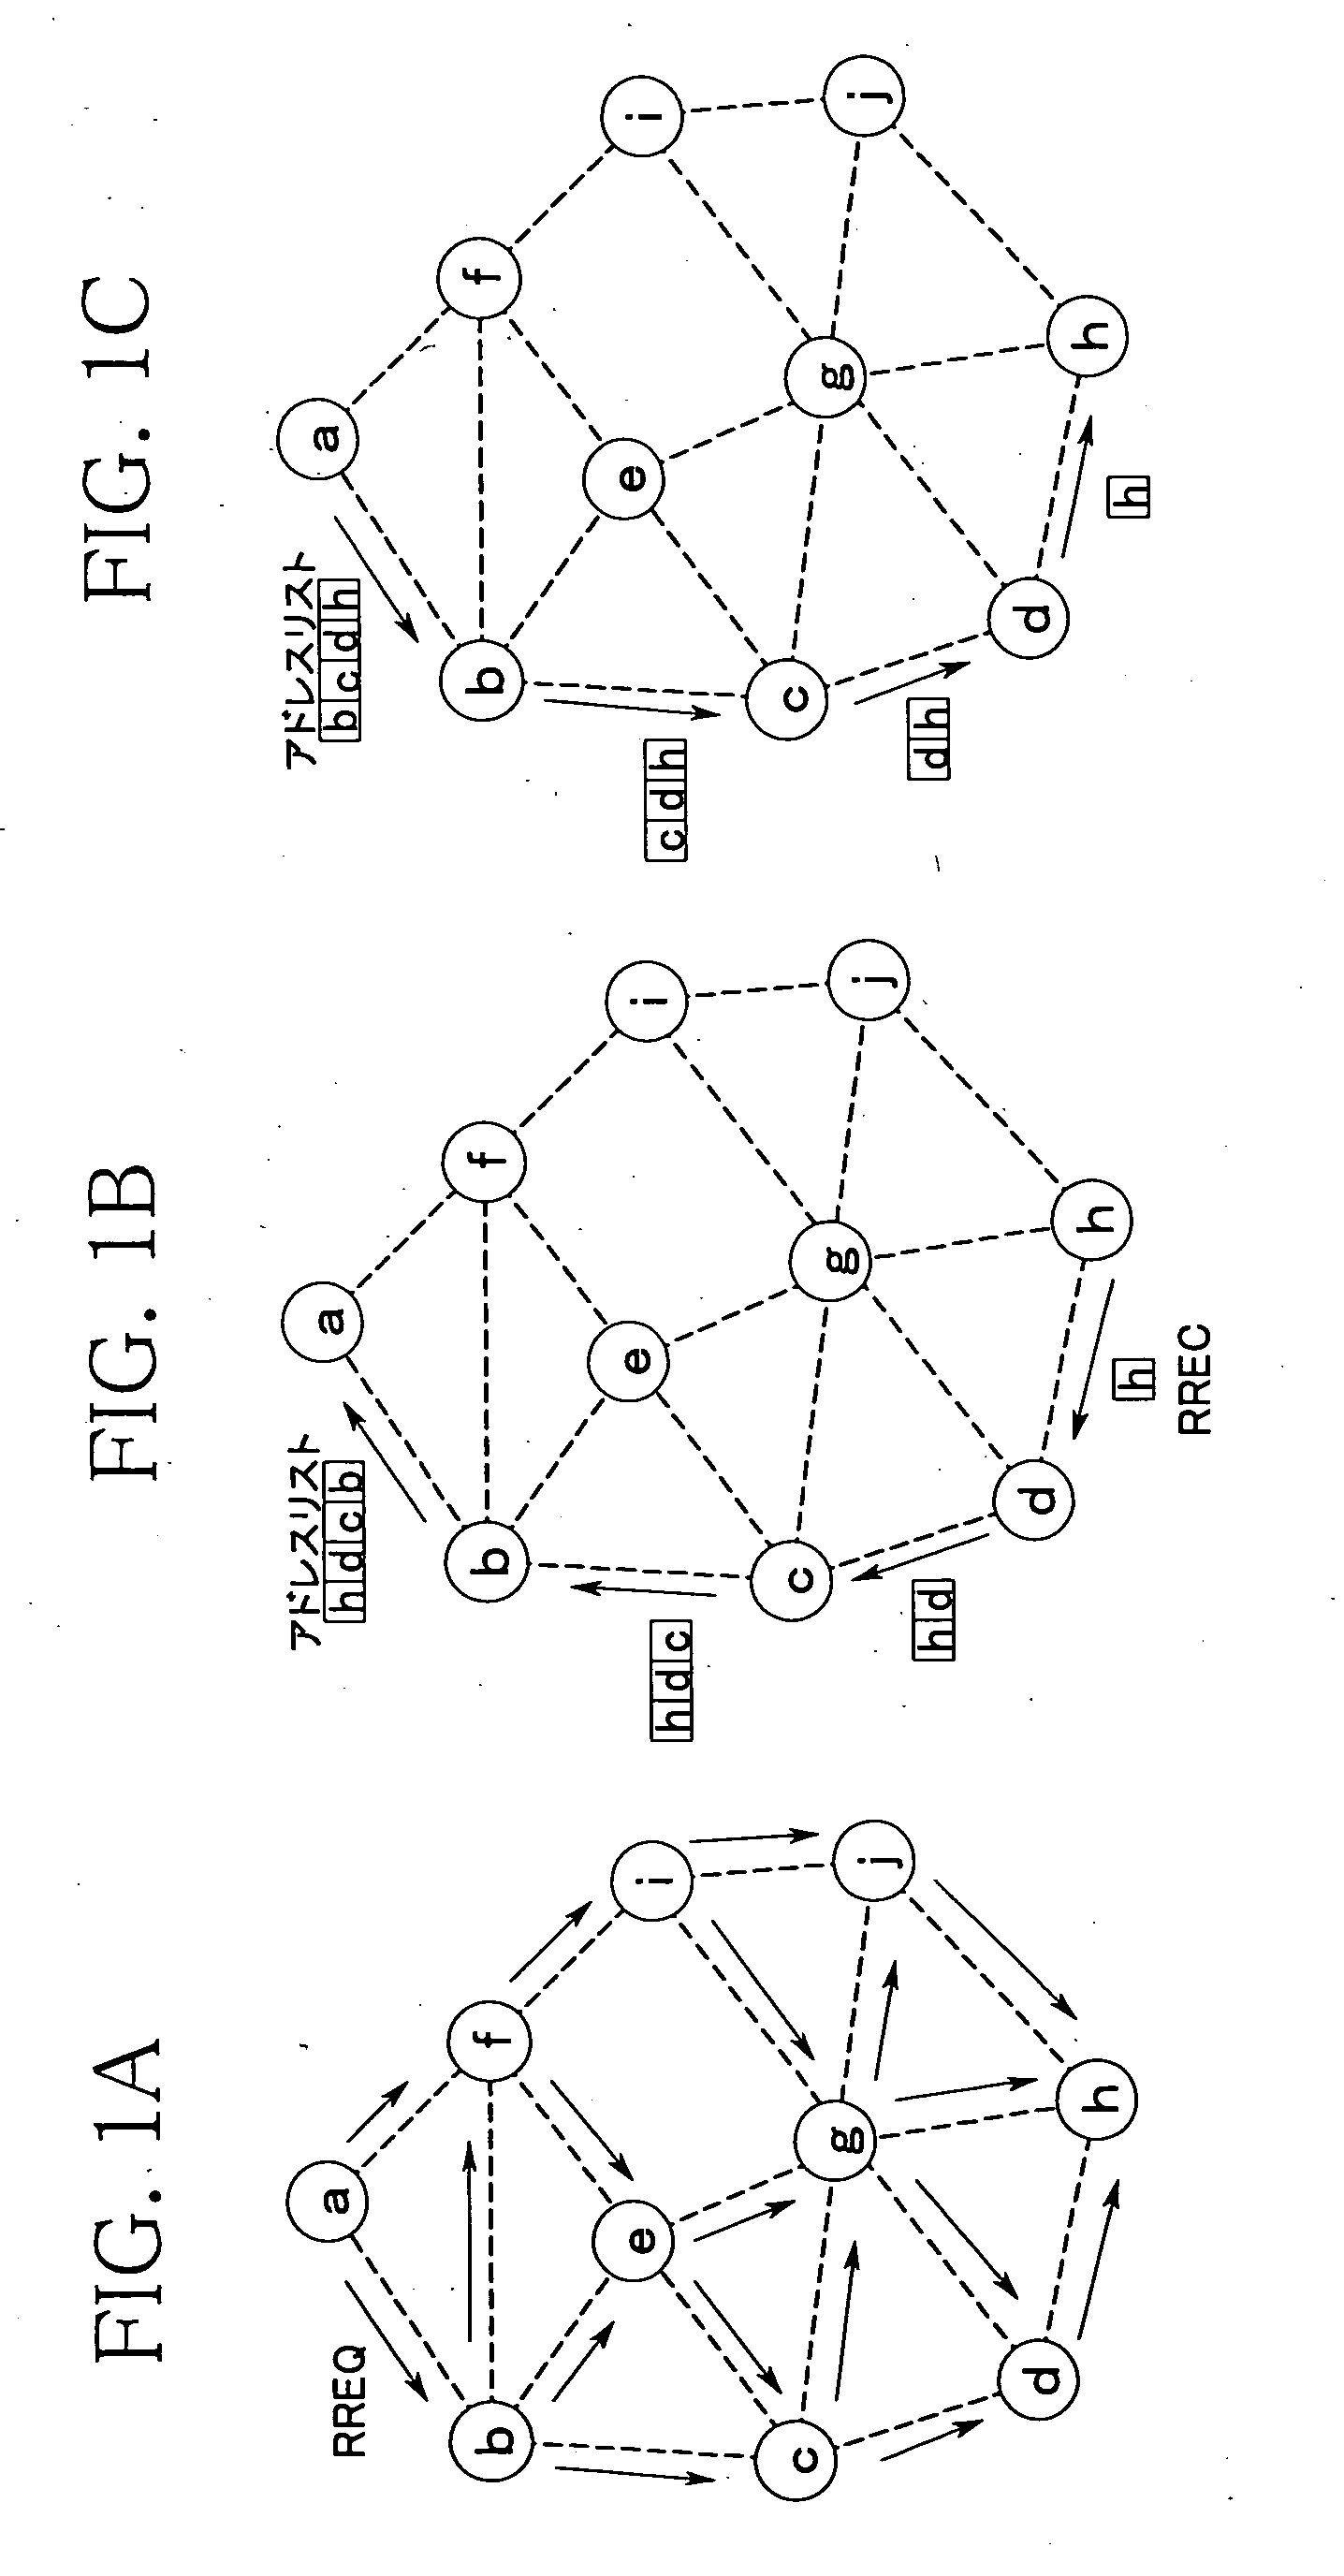 Packet relay system and wireless node